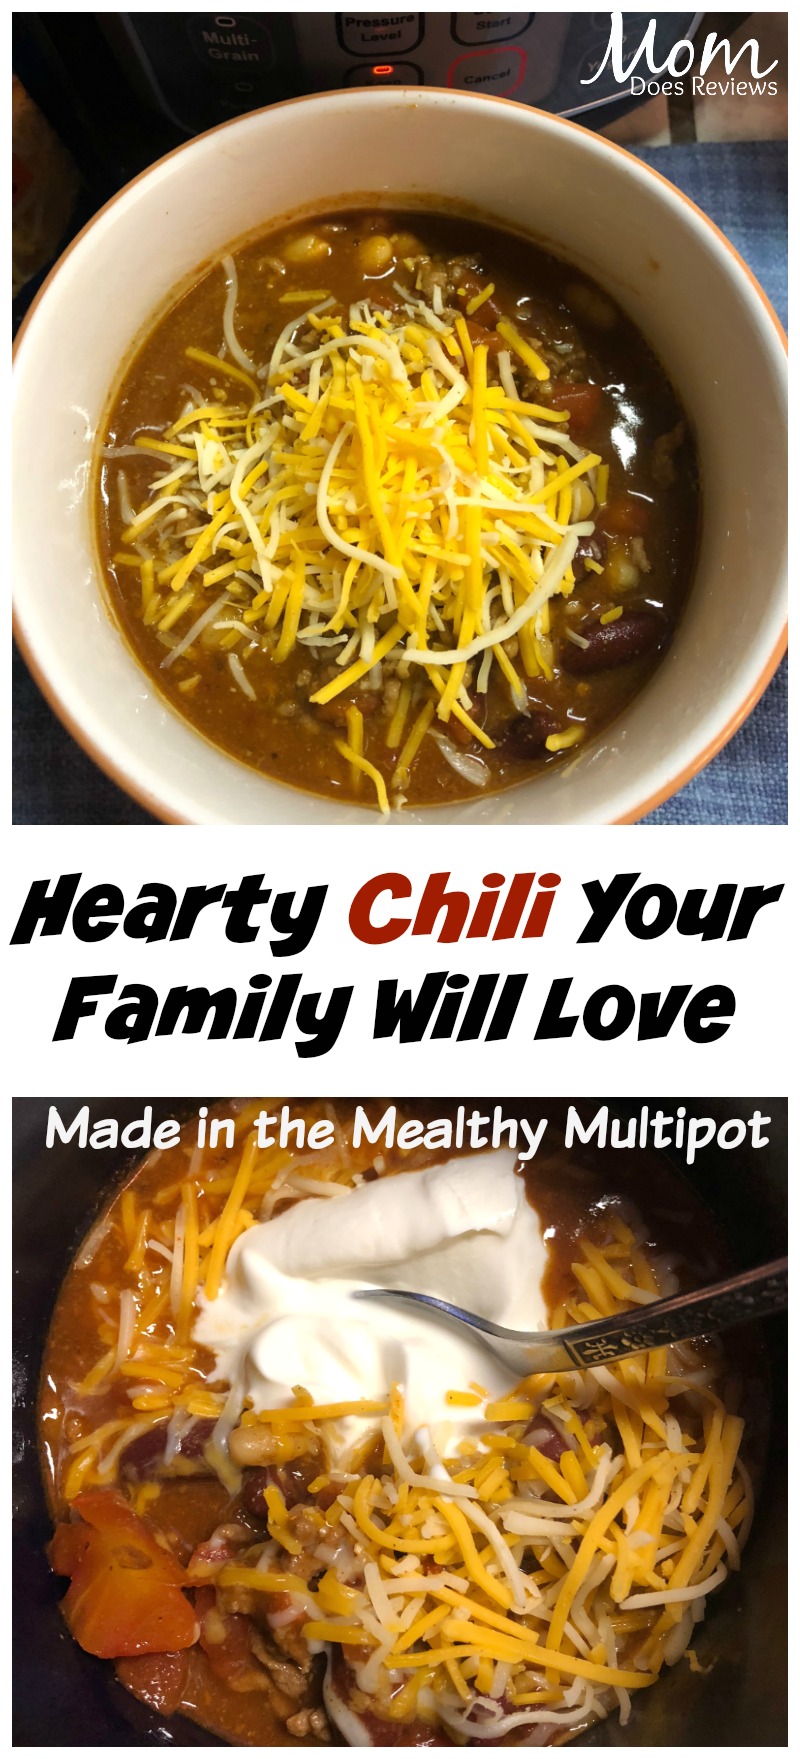 Make Chili in the Mealth MultiPot #mealthyMoms